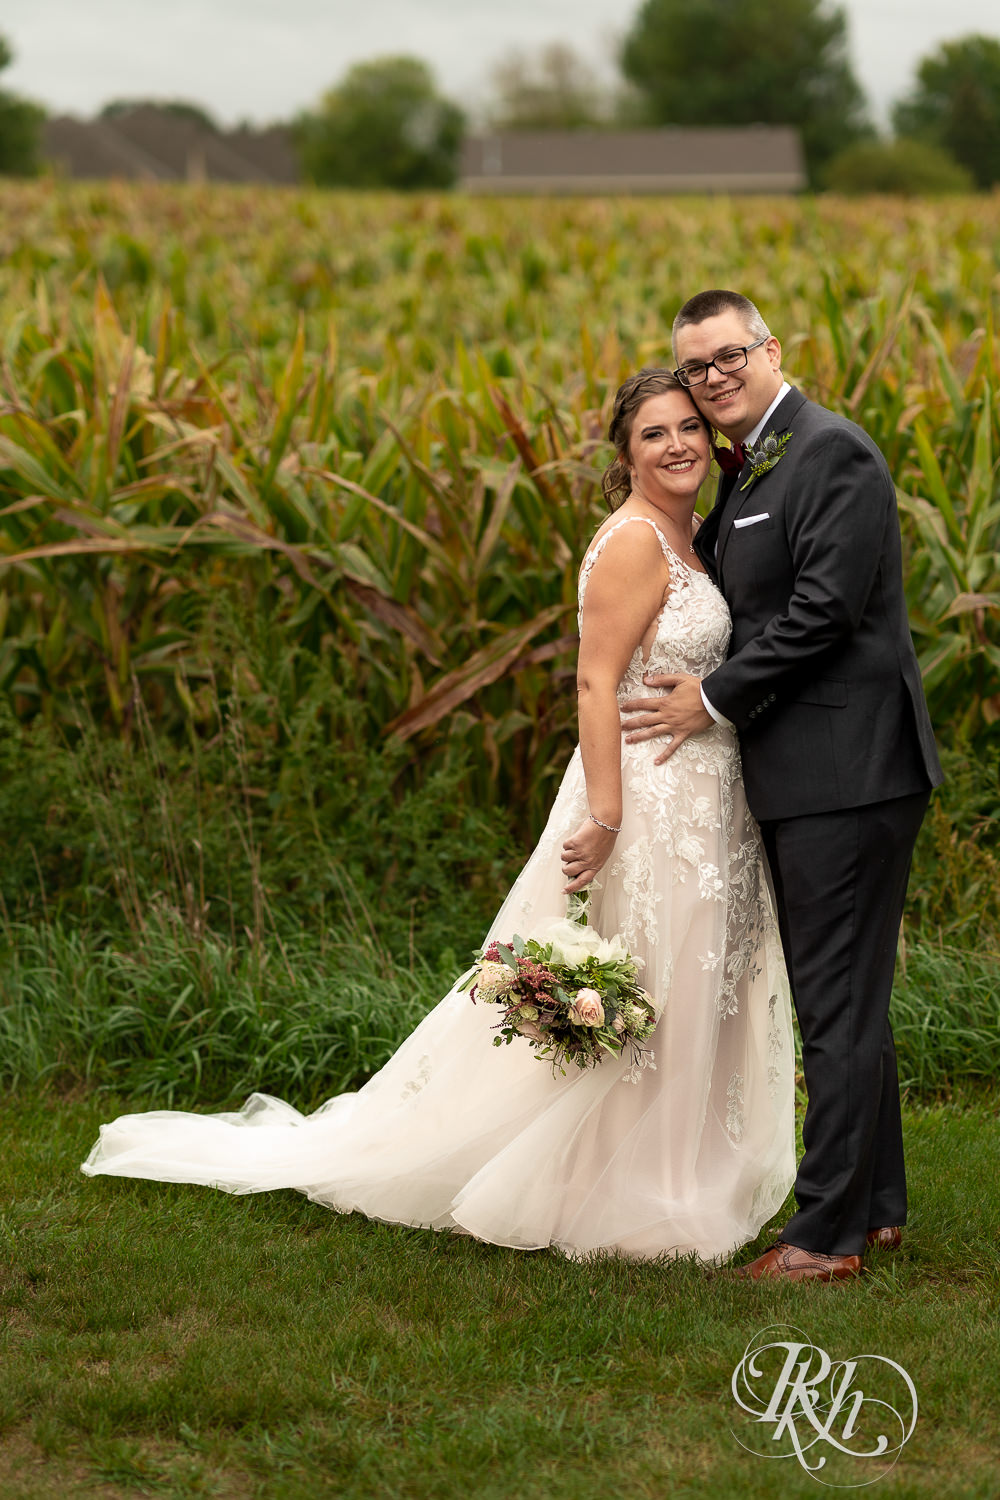 Bride and groom holding each other in front of cornfield at Glenhaven Events in Farmington, Minnesota.